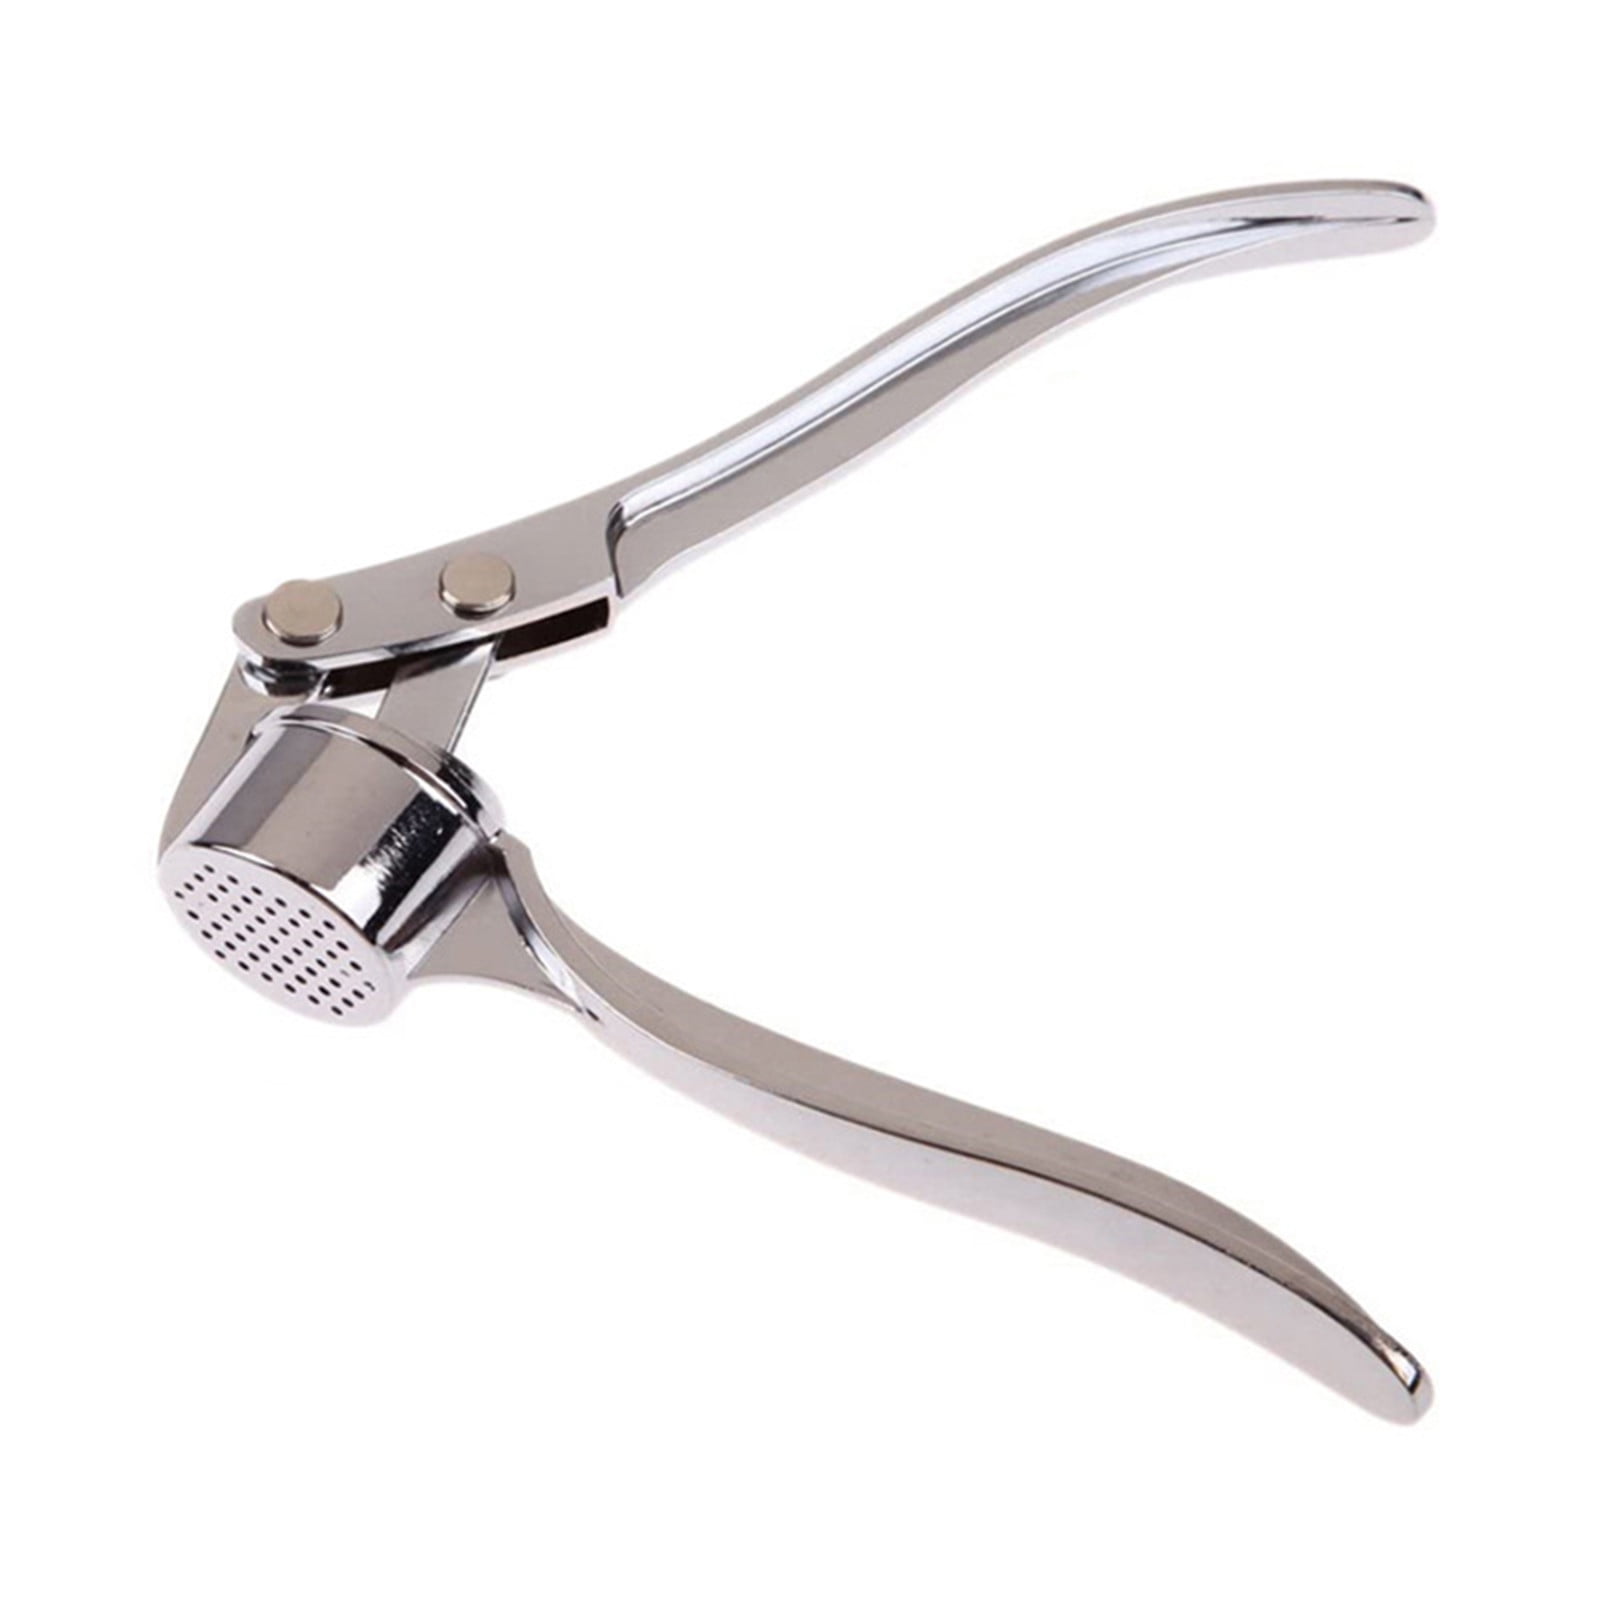 Kitcheniva Garlic Press Crusher Mincer Stainless Steel, 1 pc - Fry's Food  Stores